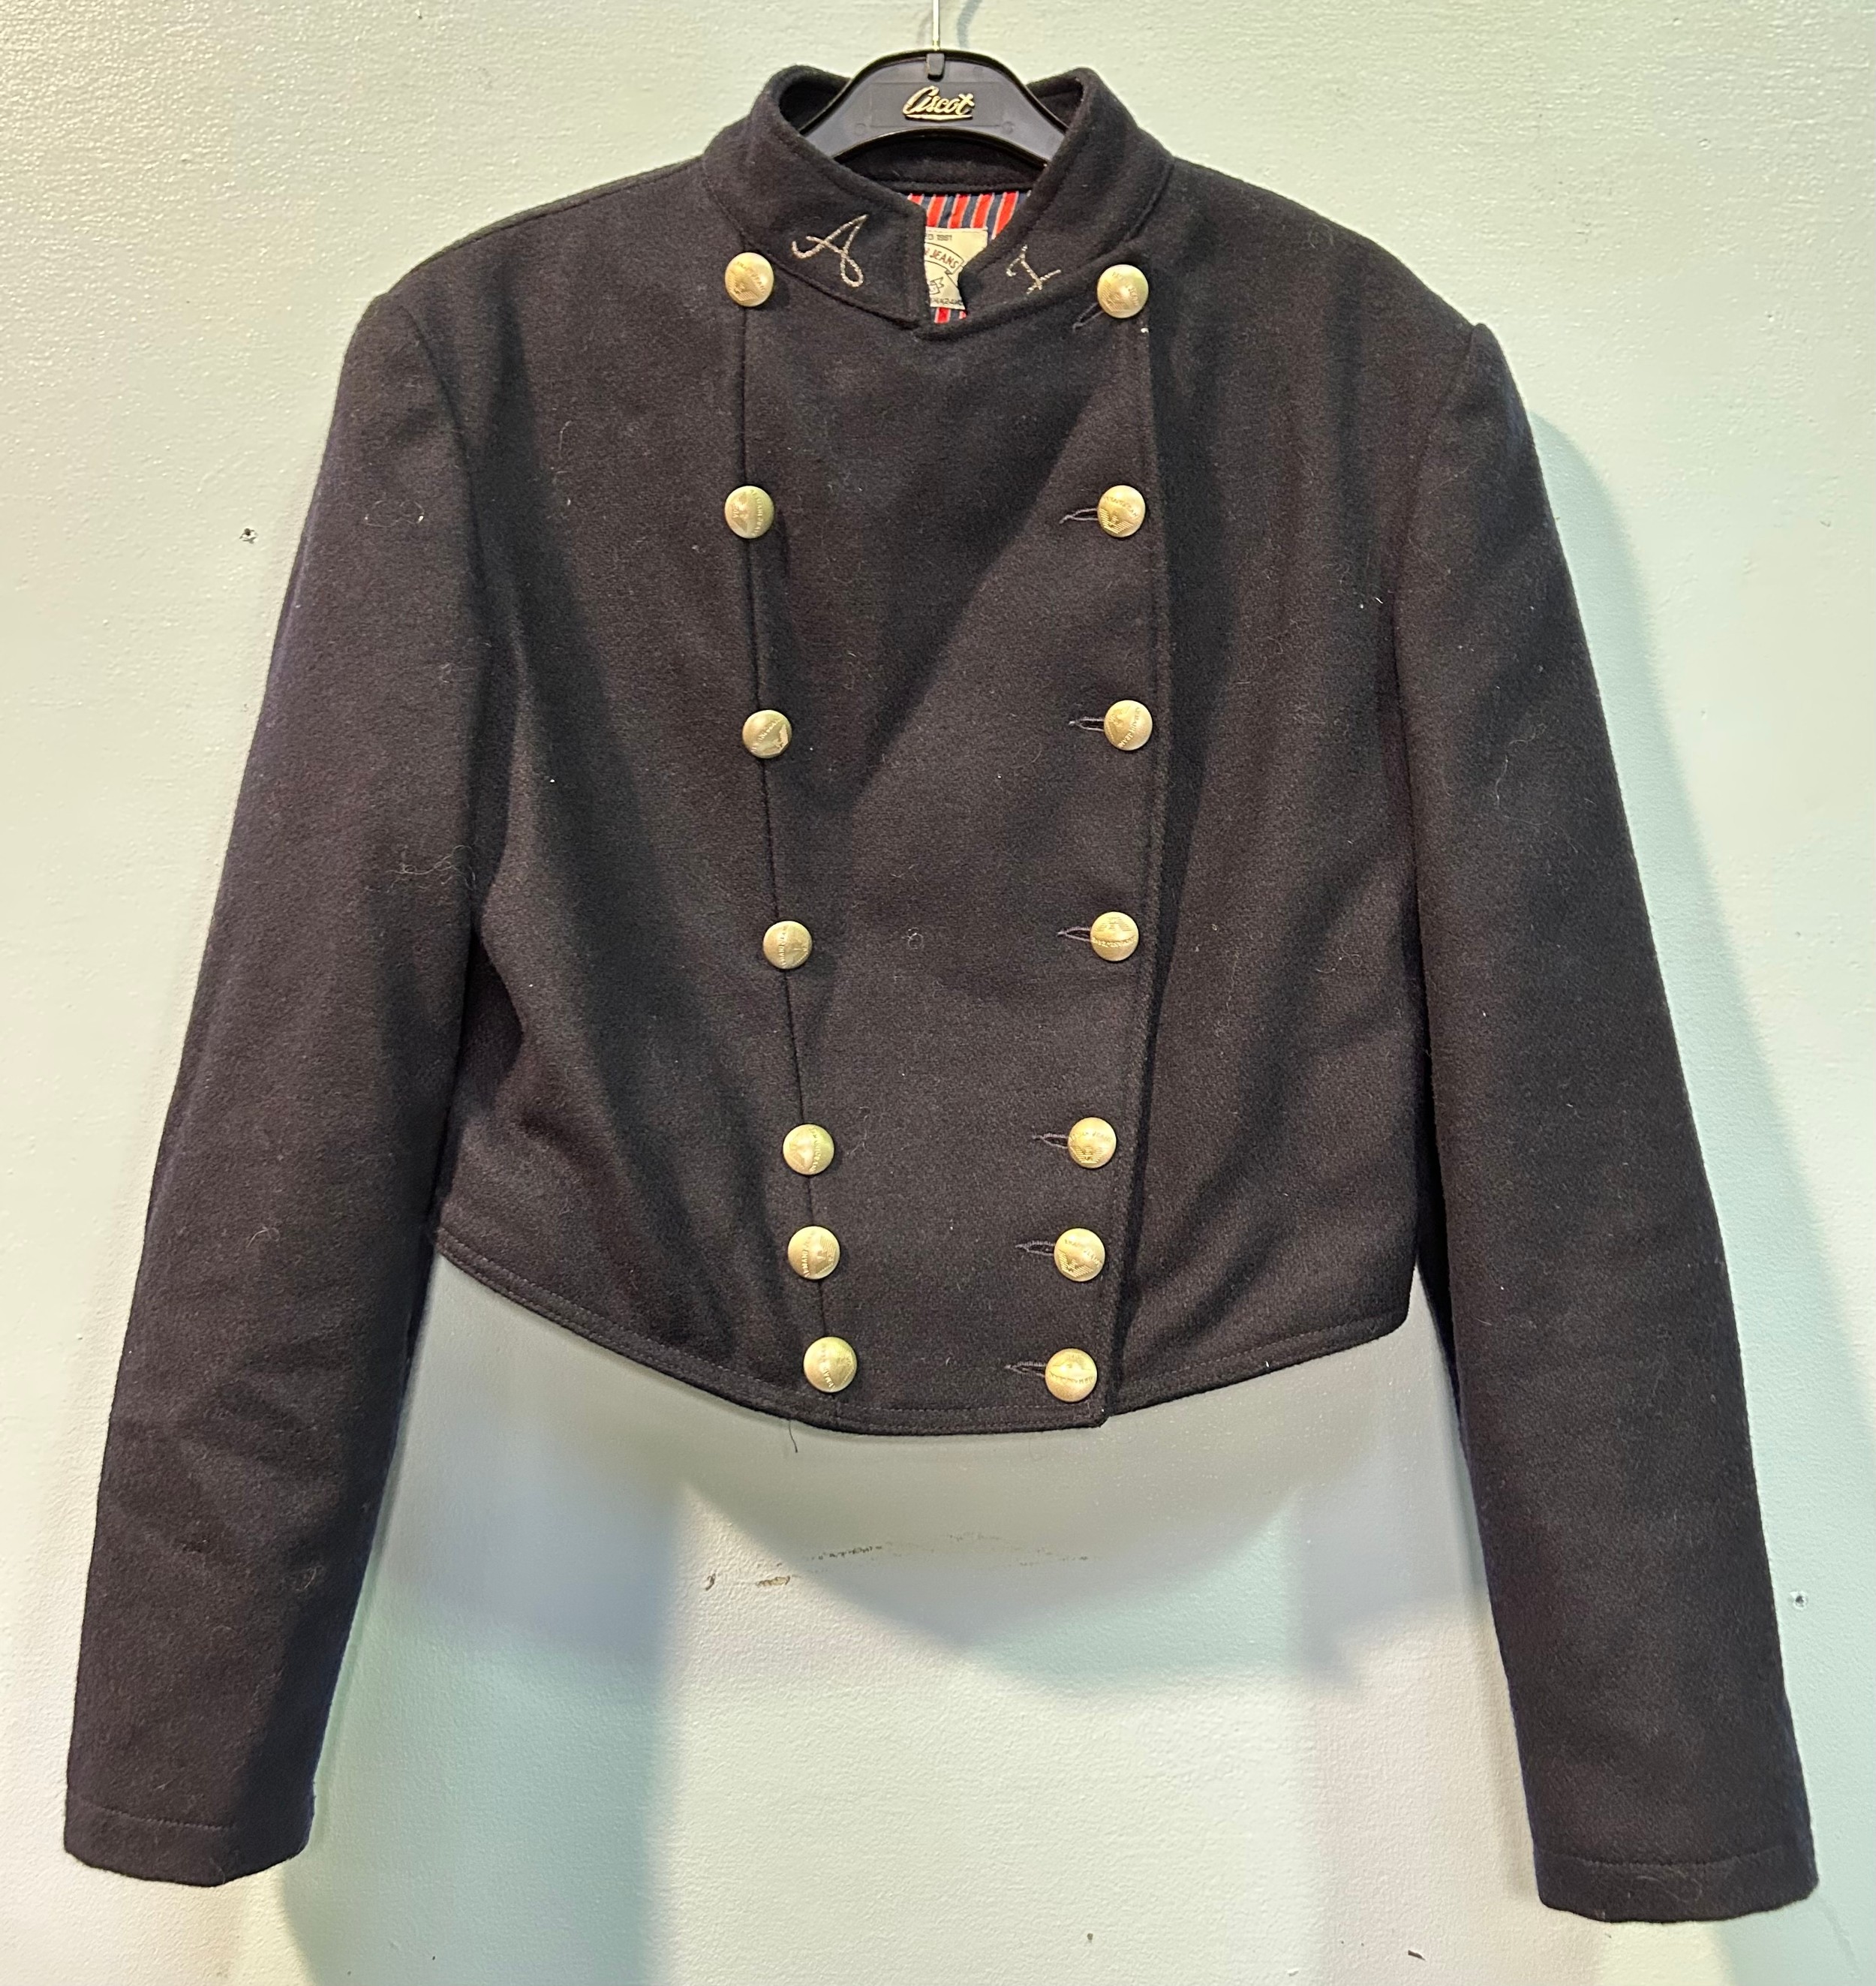 A vintage Armani Jeans woollen navy blue double-breasted jacket, officer style collar with